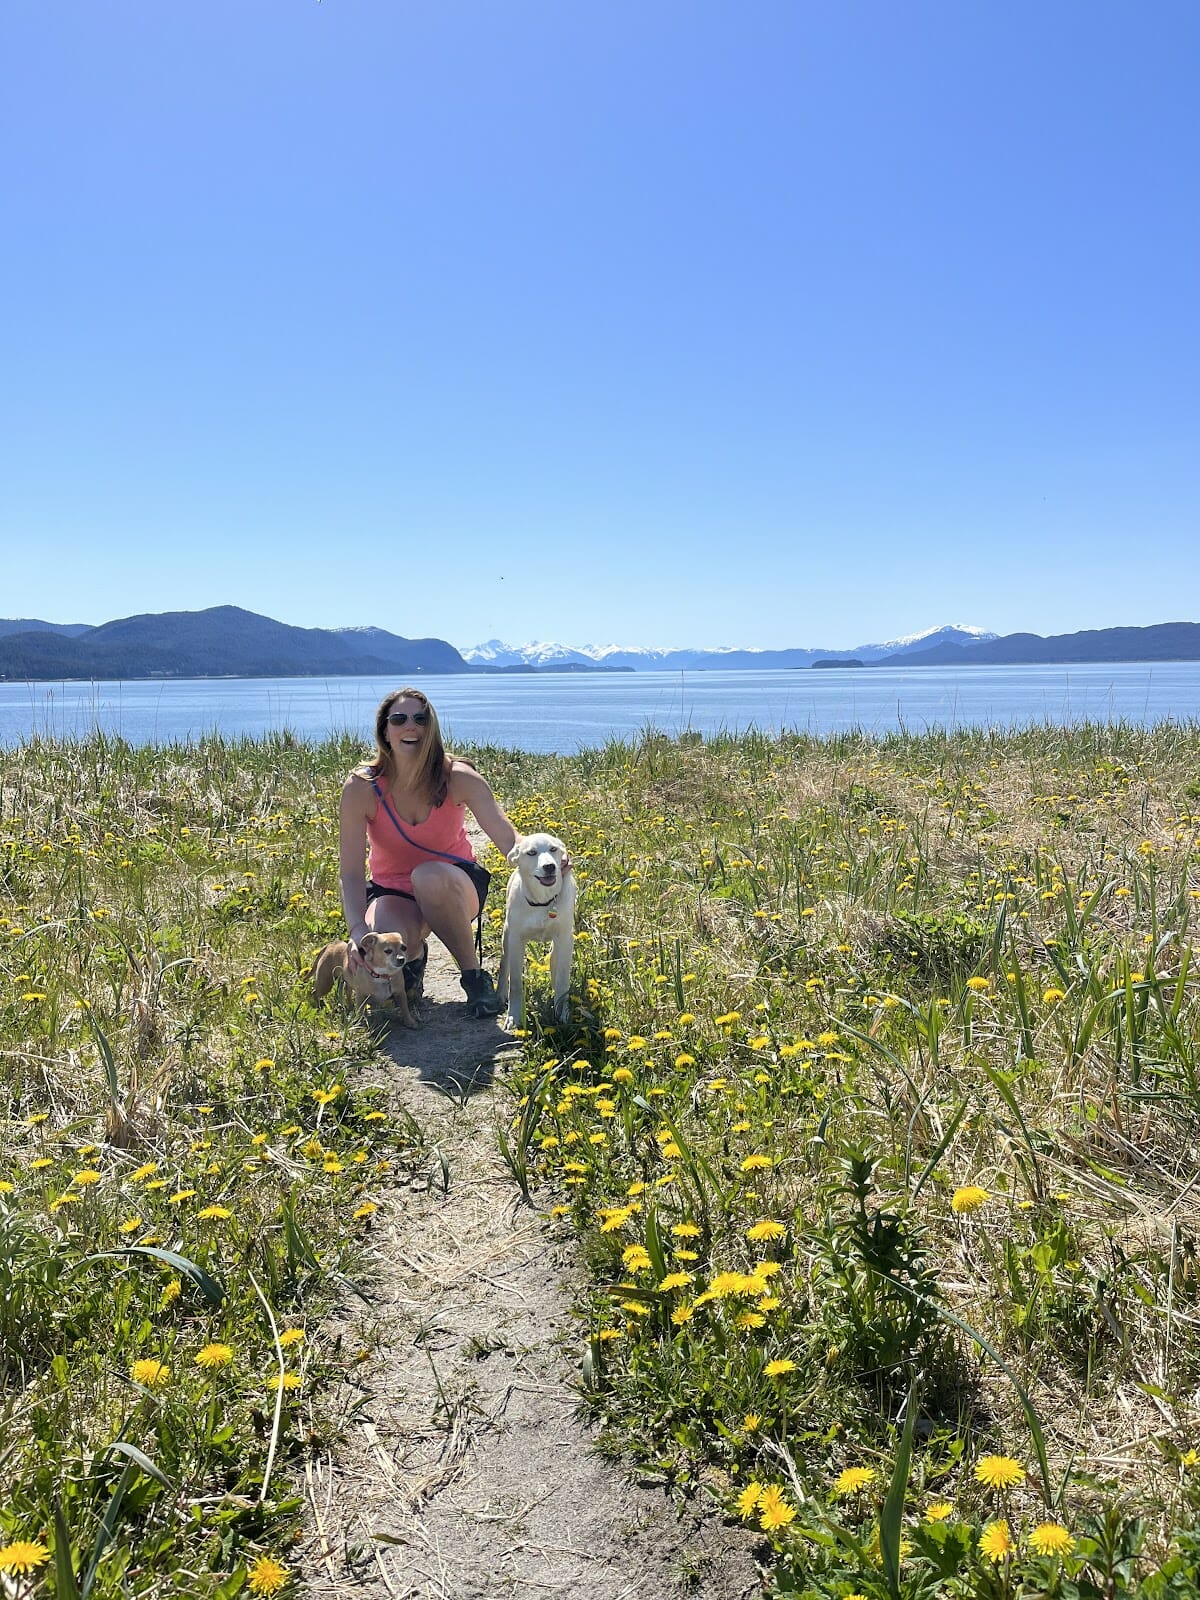 Walk Southeast 2022 participant and dog selfie on the trail at the Point Bridget.